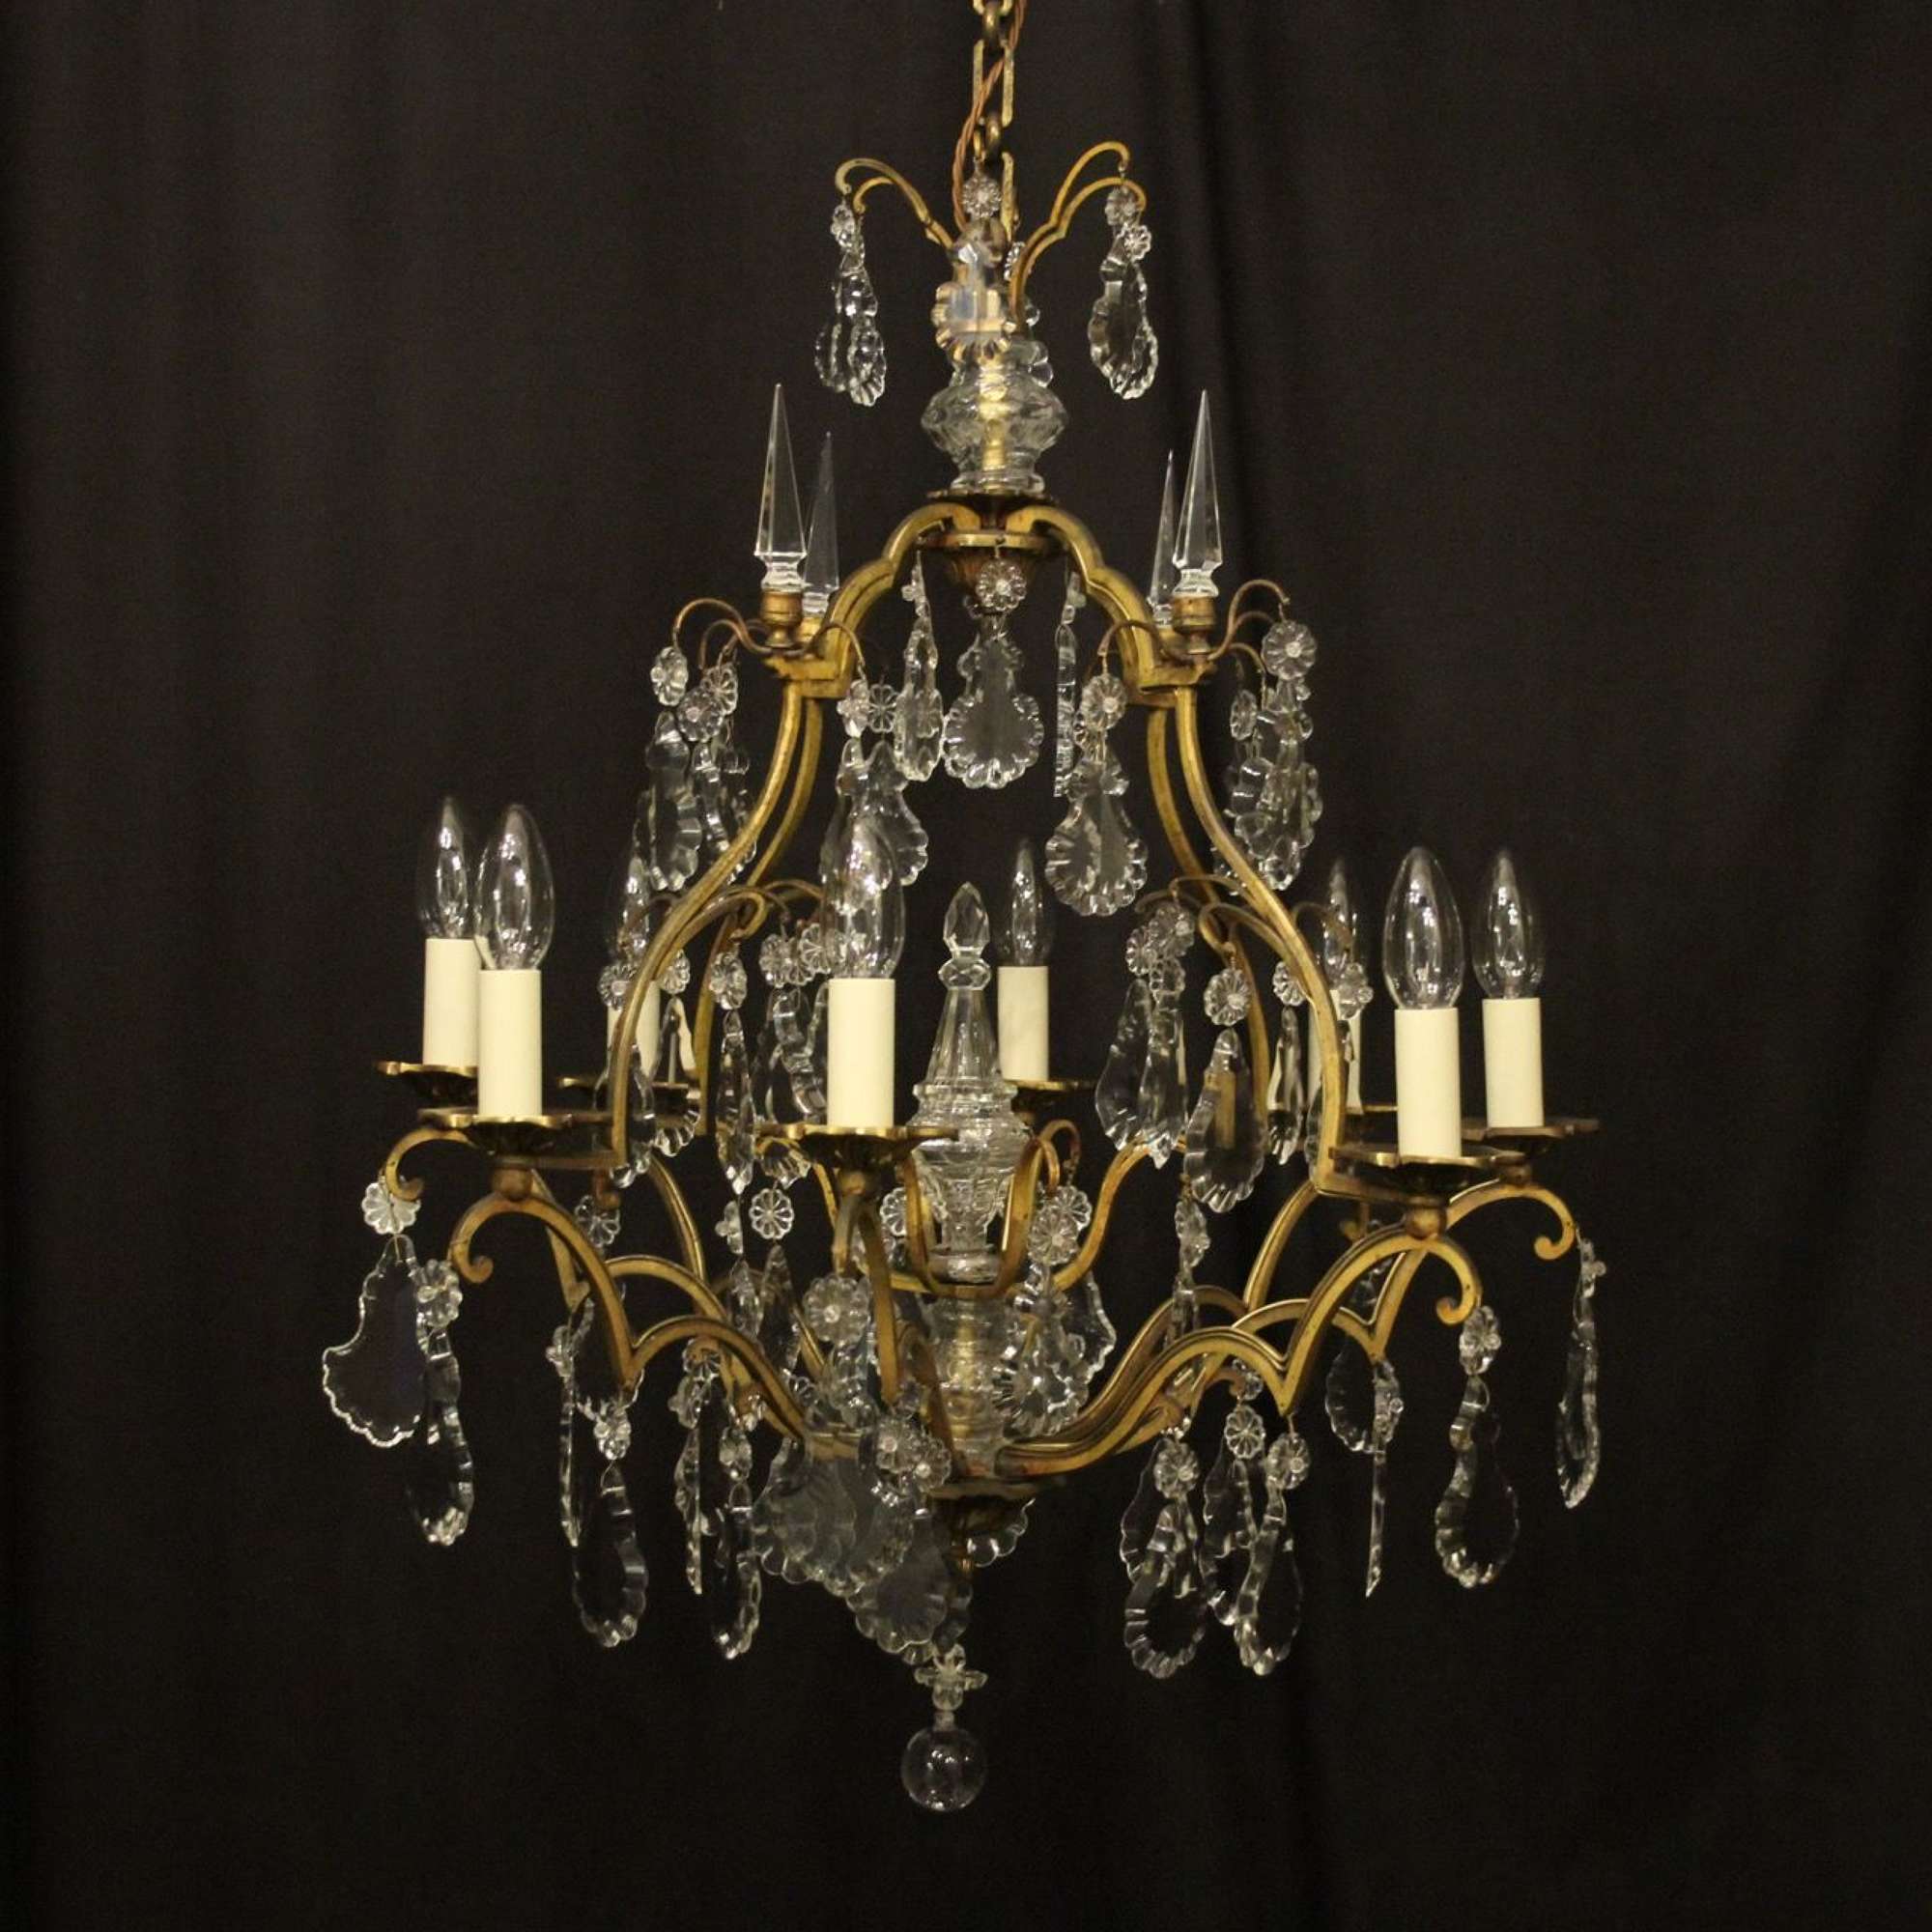 French Gilded 8 Light Crystal Antique Chandelier